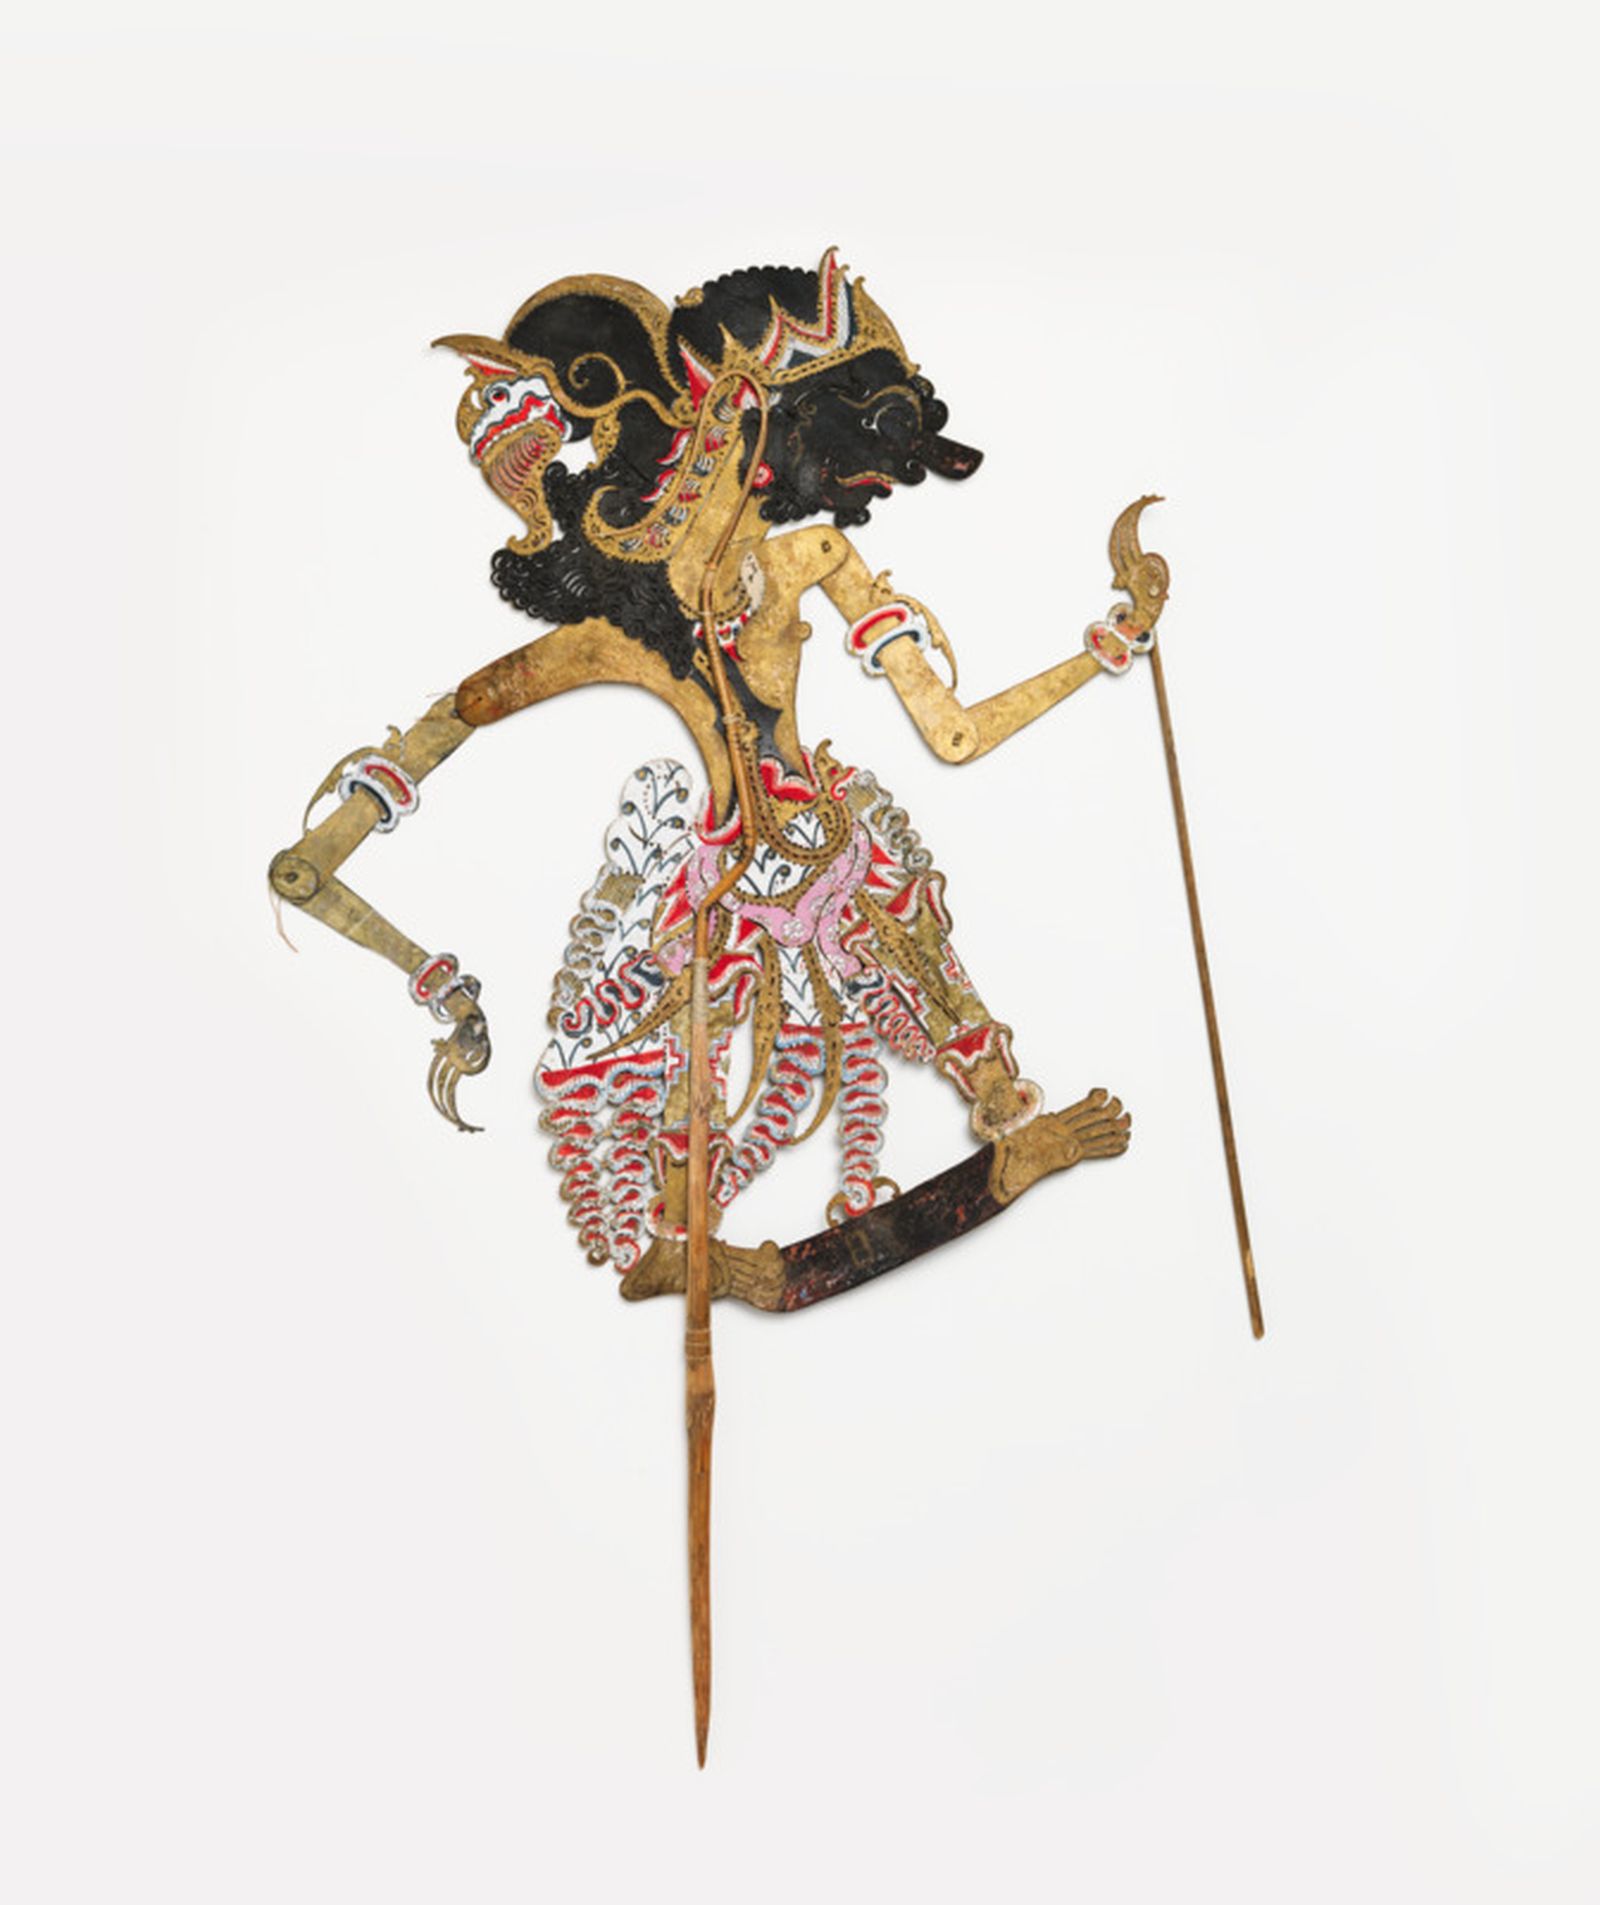 Photograph of javanese puppet